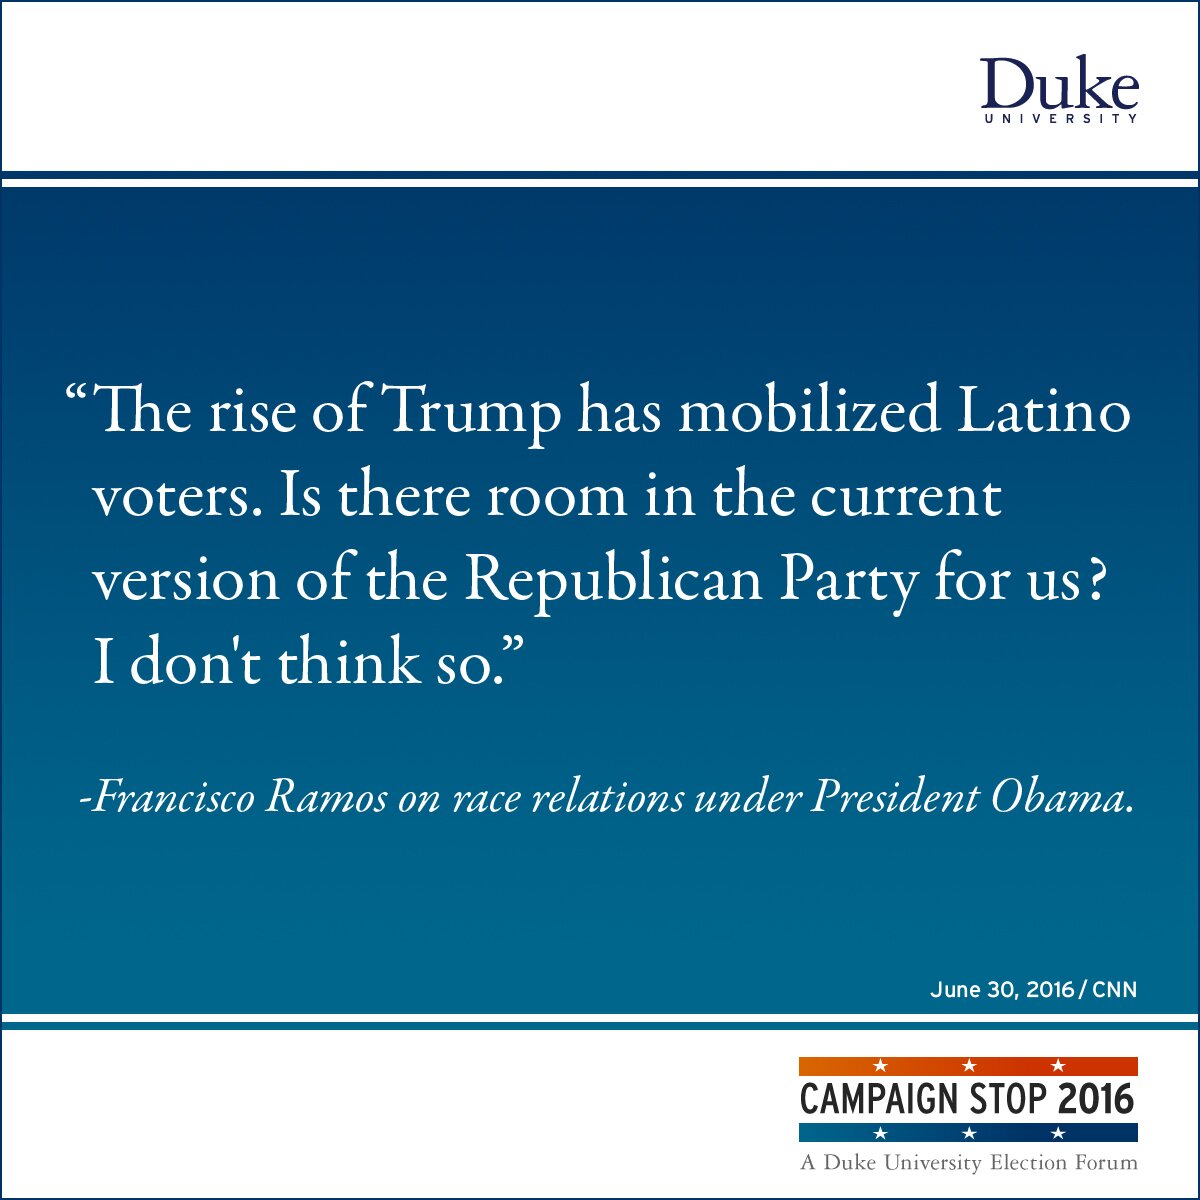 “The rise of Trump has mobilized Latino voters. Is there room in the current version of the Republican Party for us? I don